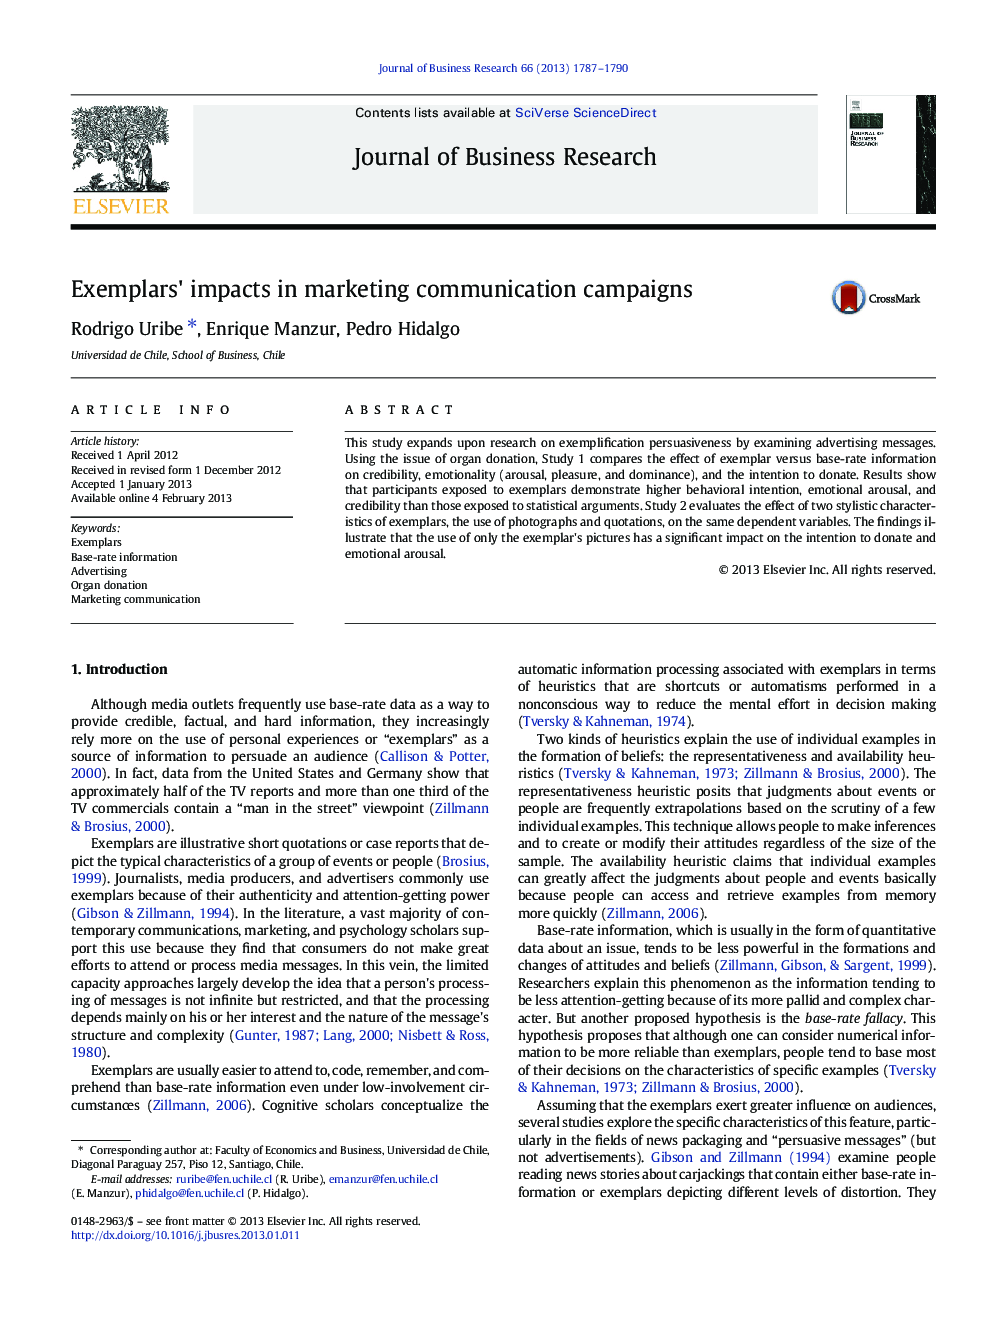 Exemplars' impacts in marketing communication campaigns